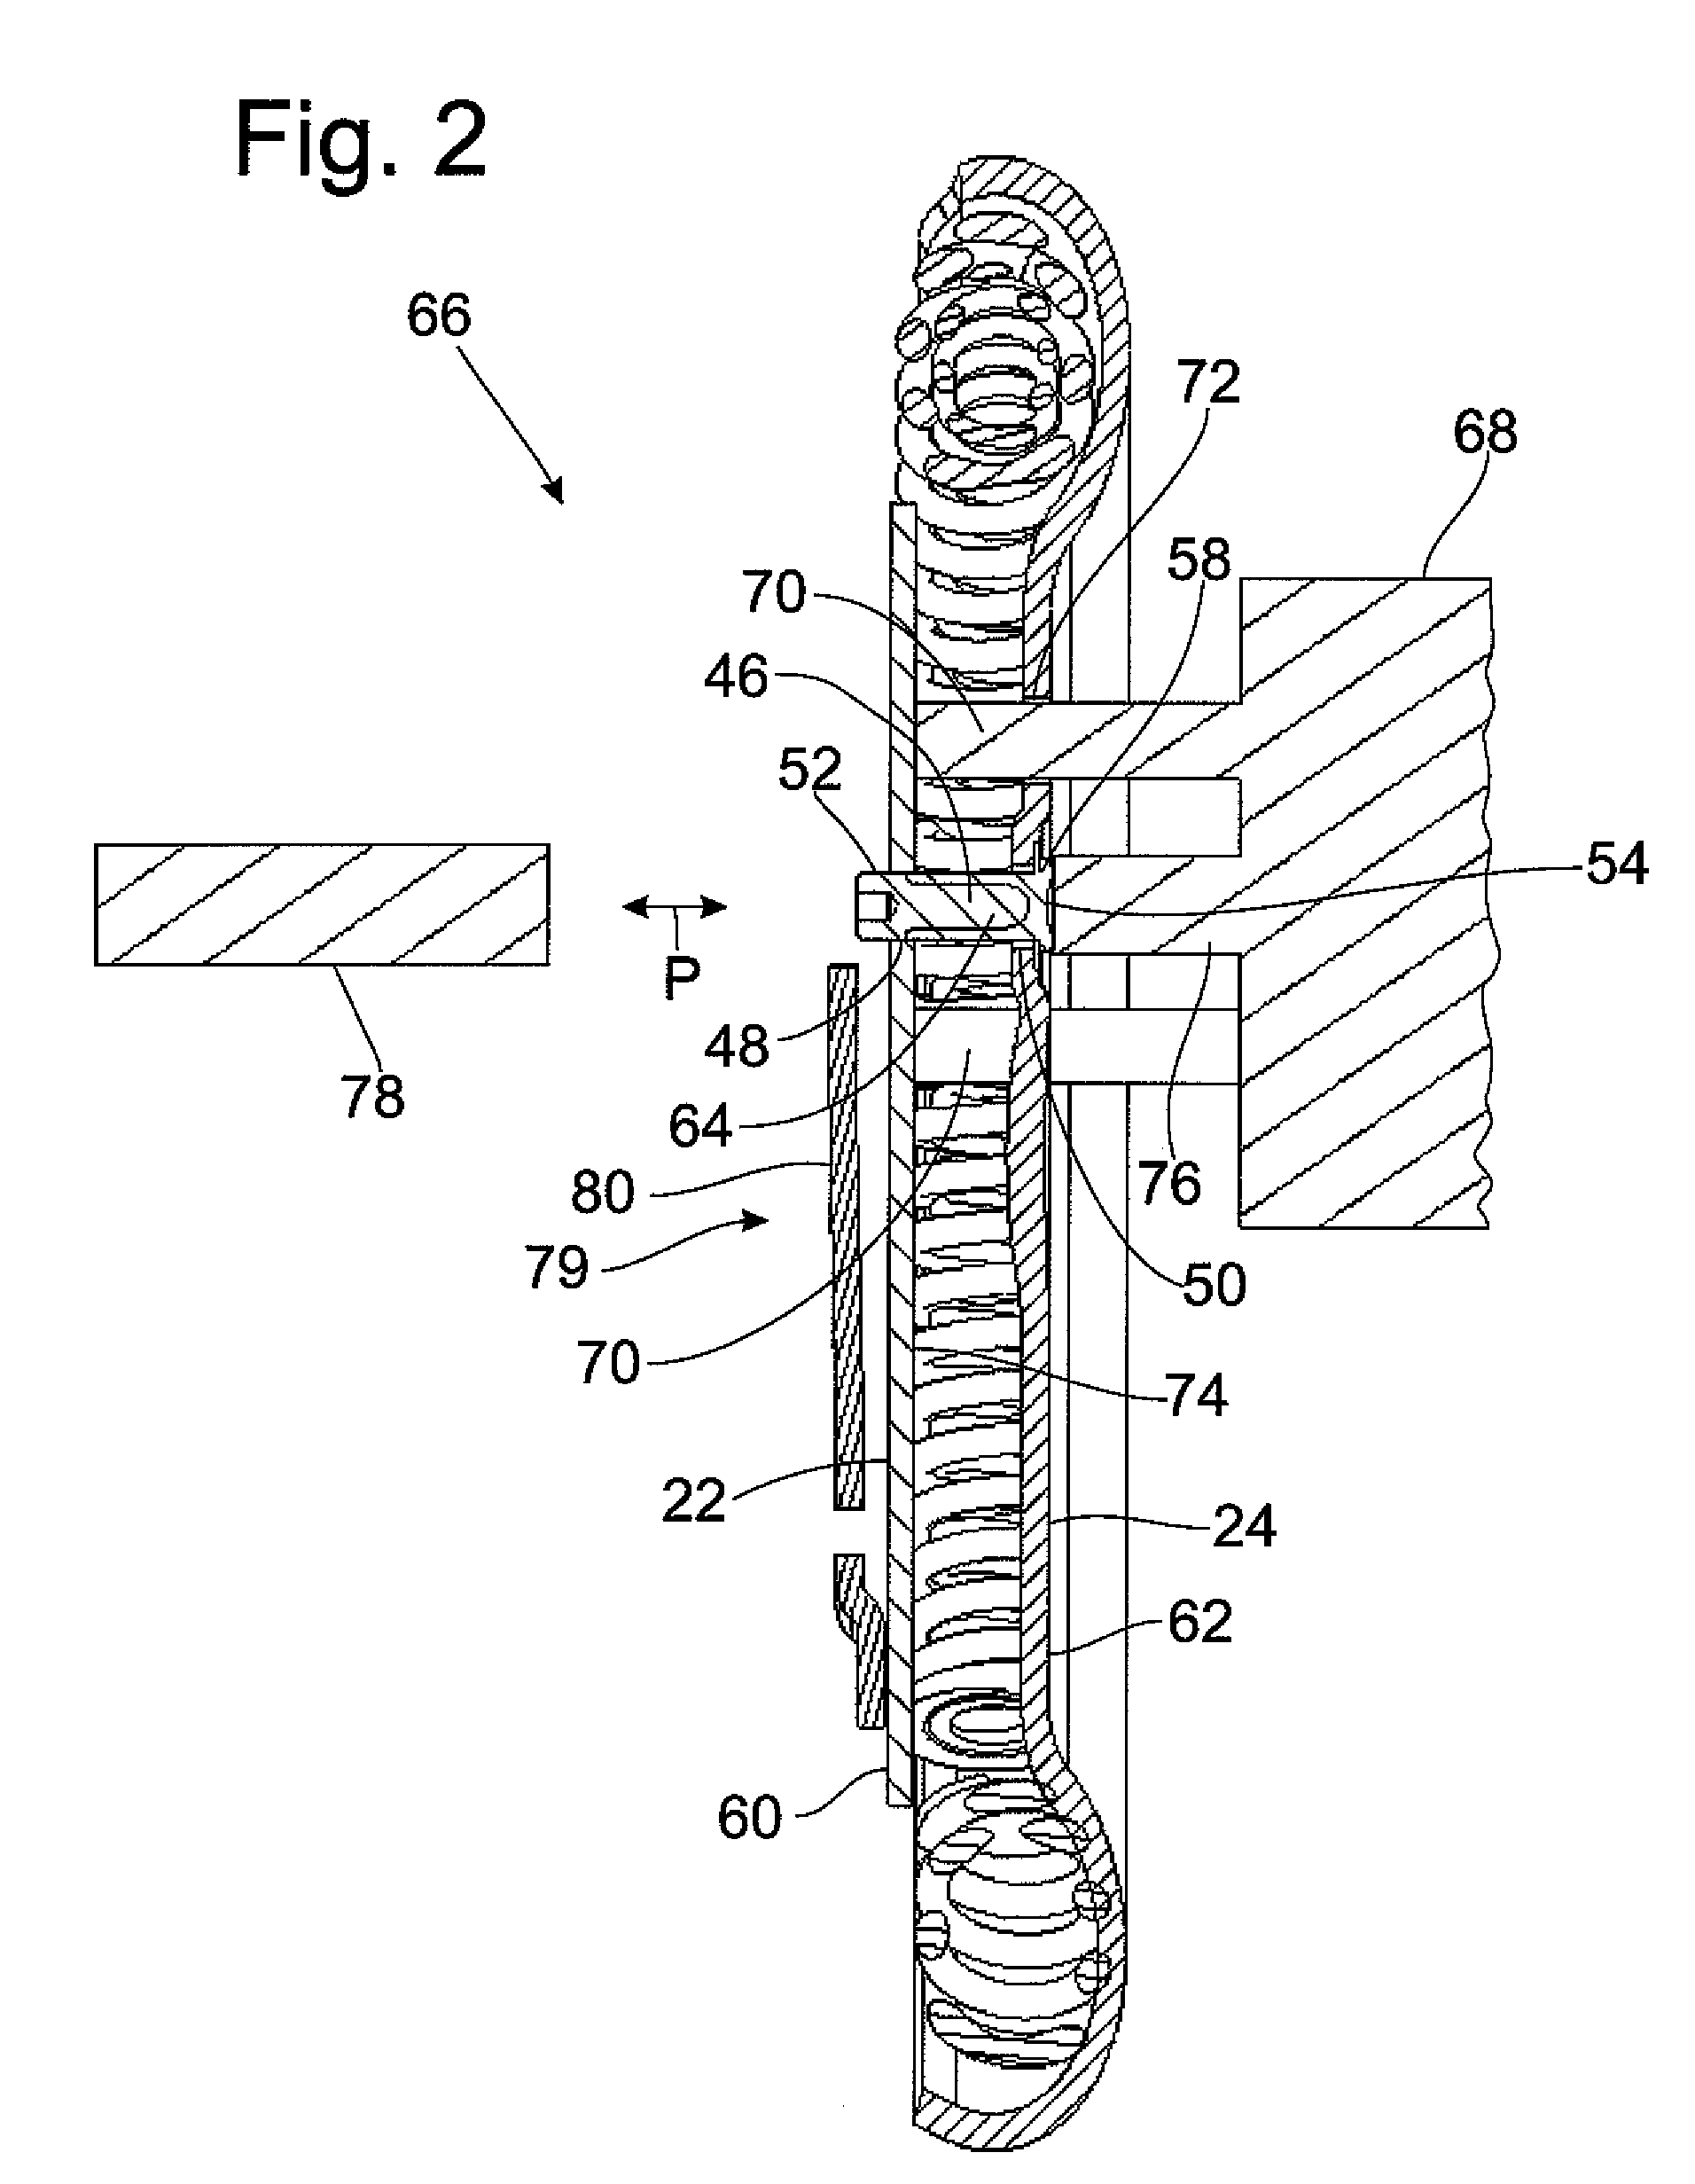 Method for riveting two structural component parts, in particular cover plate elements of a torsional vibration damper arrangement, at a distance from one another